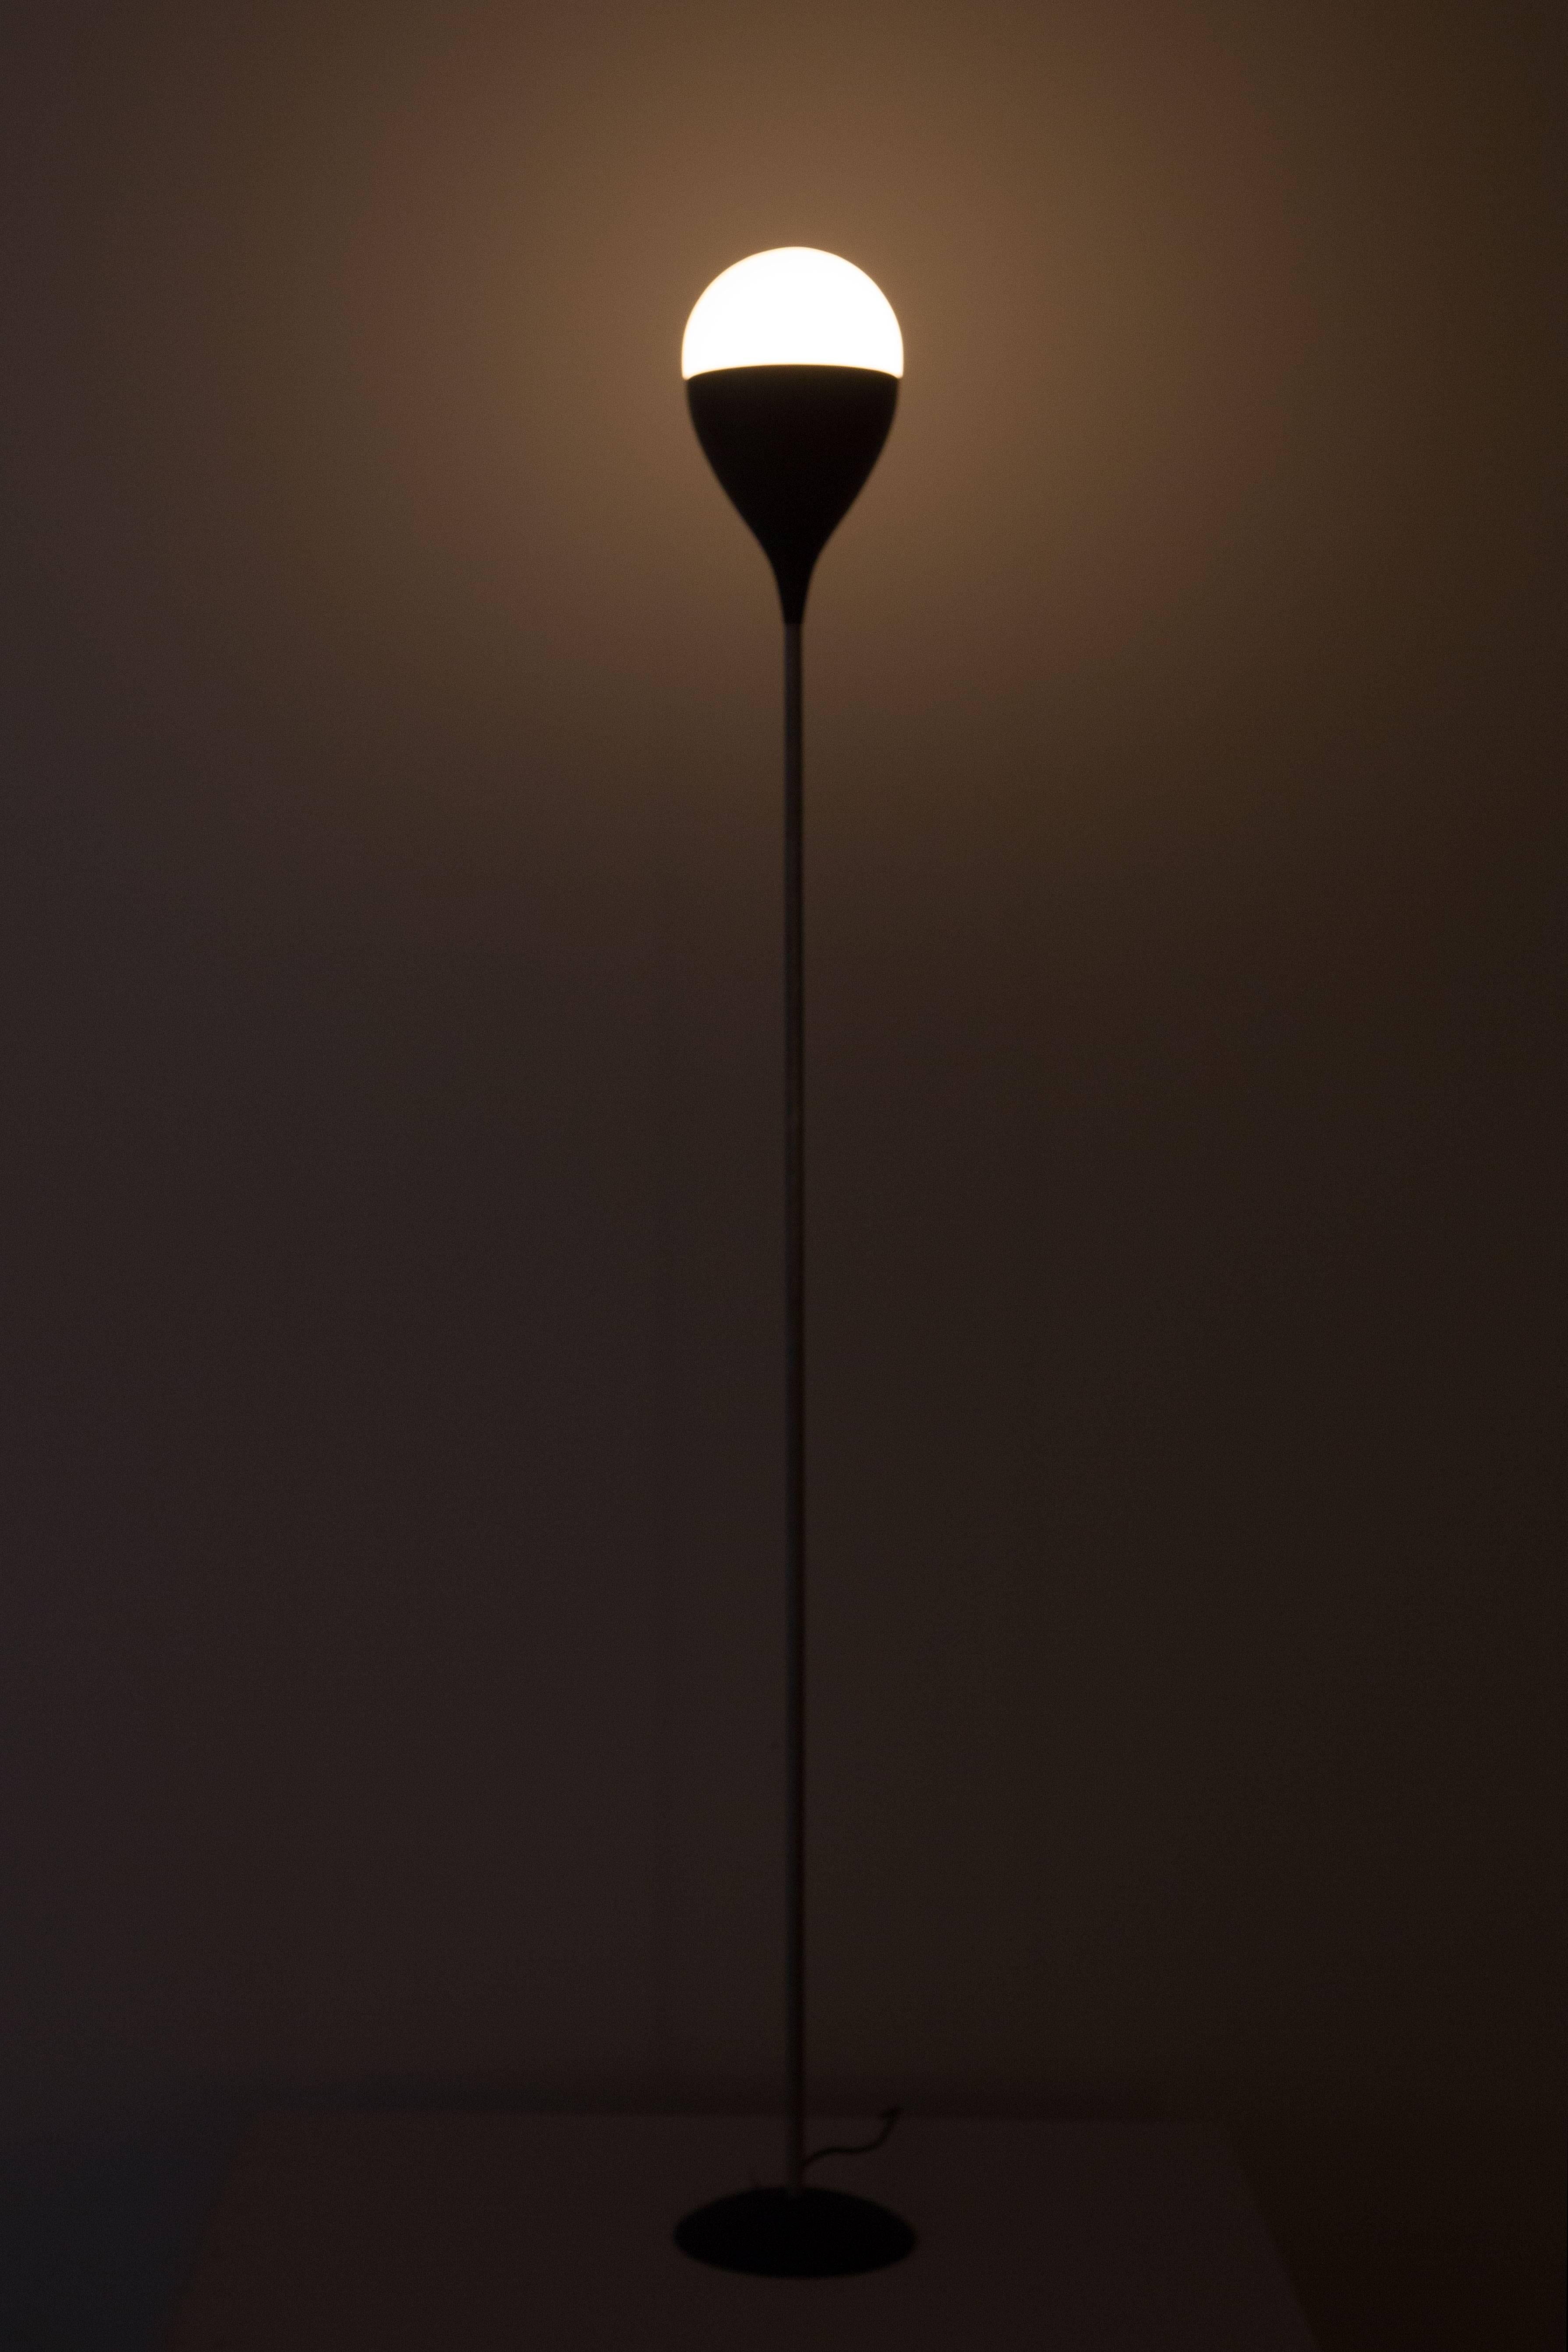 Floor lamp by Stilnovo made of die-cast aluminium with crease paint, nickel-plate brass, opal glass and cast iron base. Manufactured by Stilnovo in the late 1950s. Original label and cord. Takes an E27 75W maximum bulb.
 